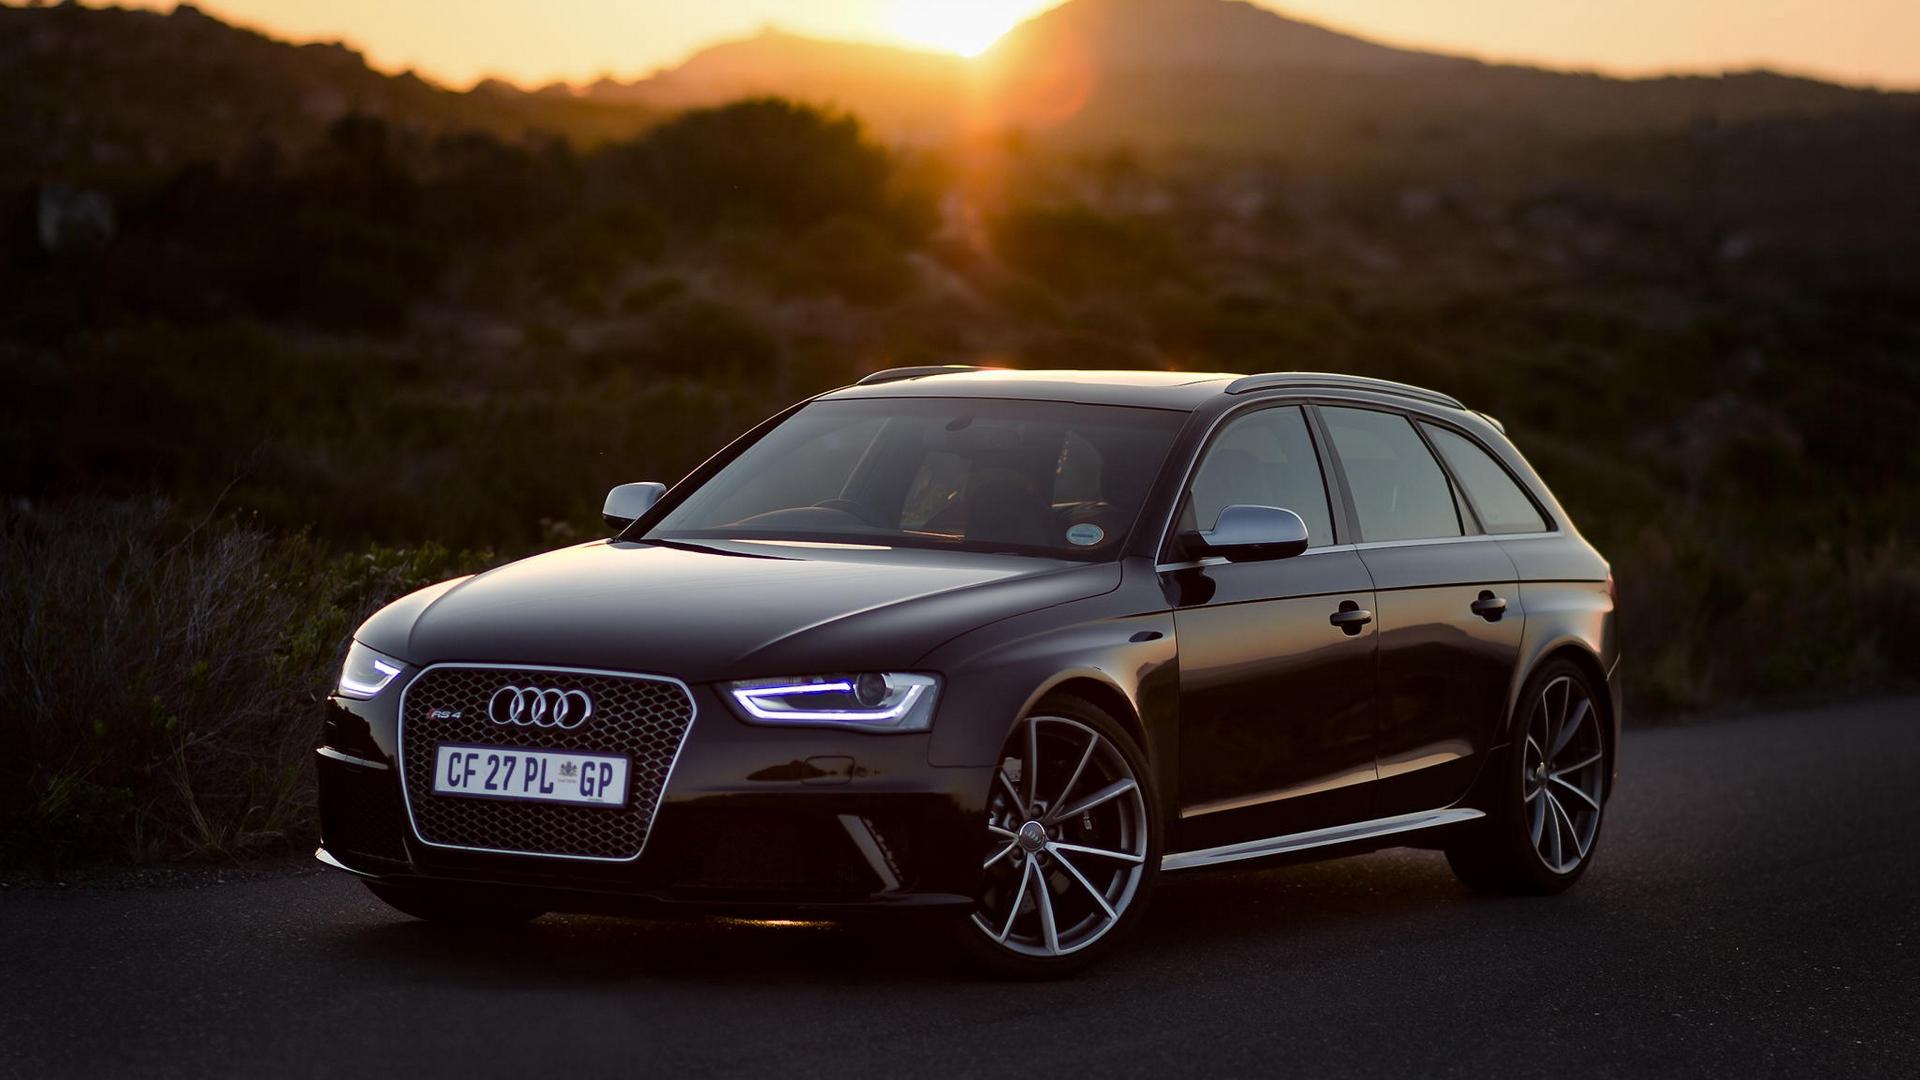 Download wallpaper 1920x1080 audi, rs side view, black, sunset